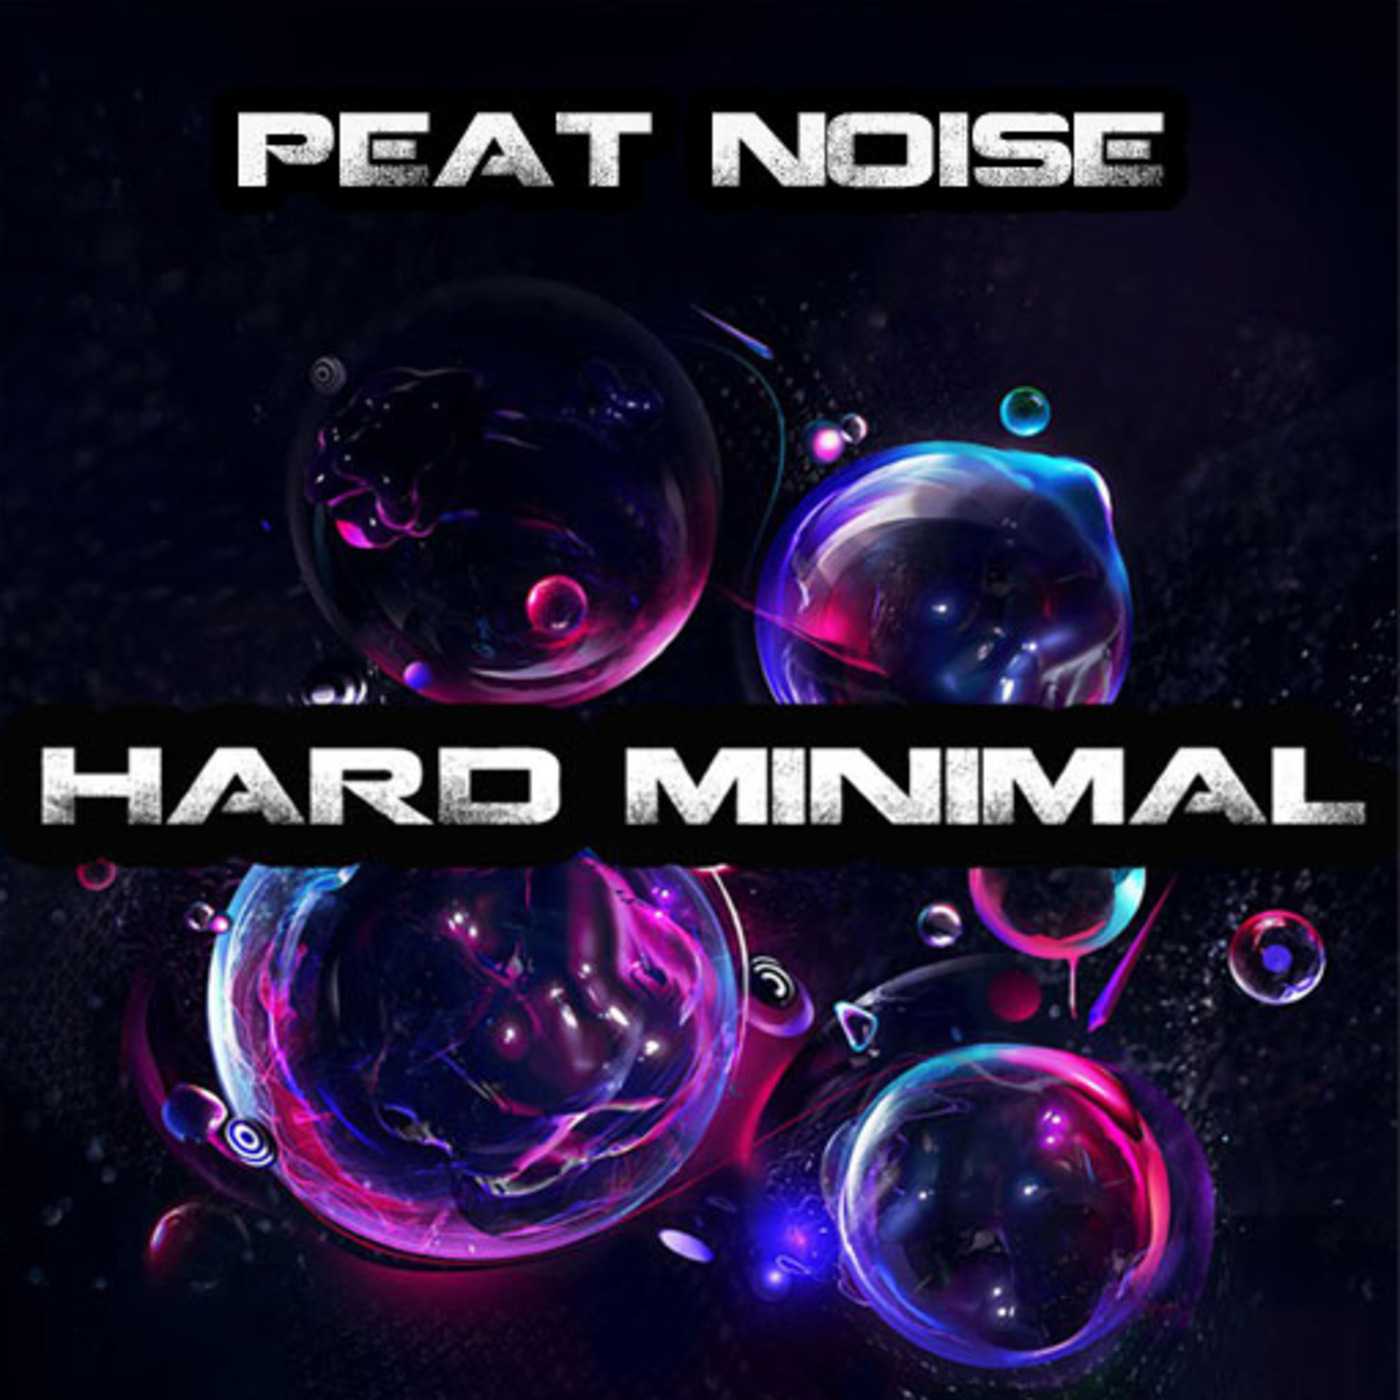 HARD MINIMAL #67 by PEAT NOISE (Naughty Pills records/Npr limitless/HGR)